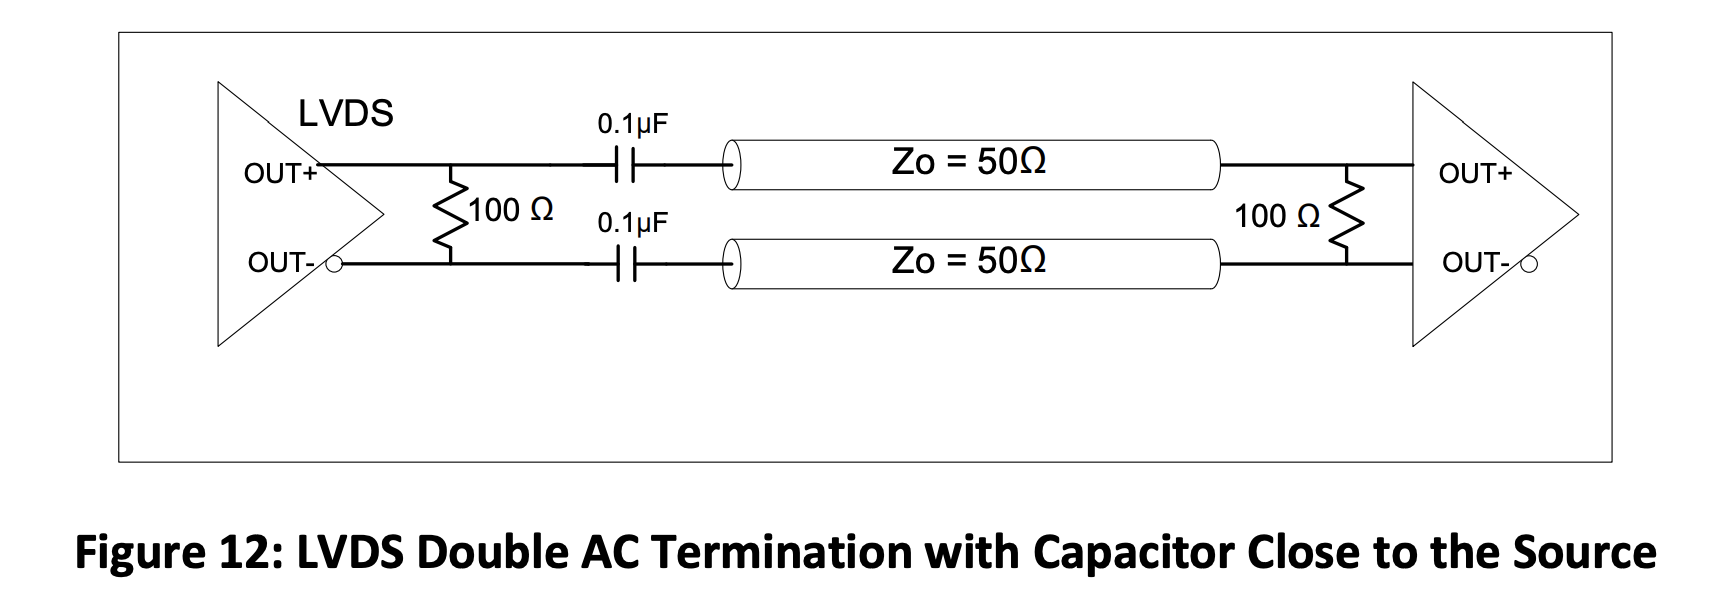 Figure 12 LVDS Double AC Termination with Capacitor Close to the Source